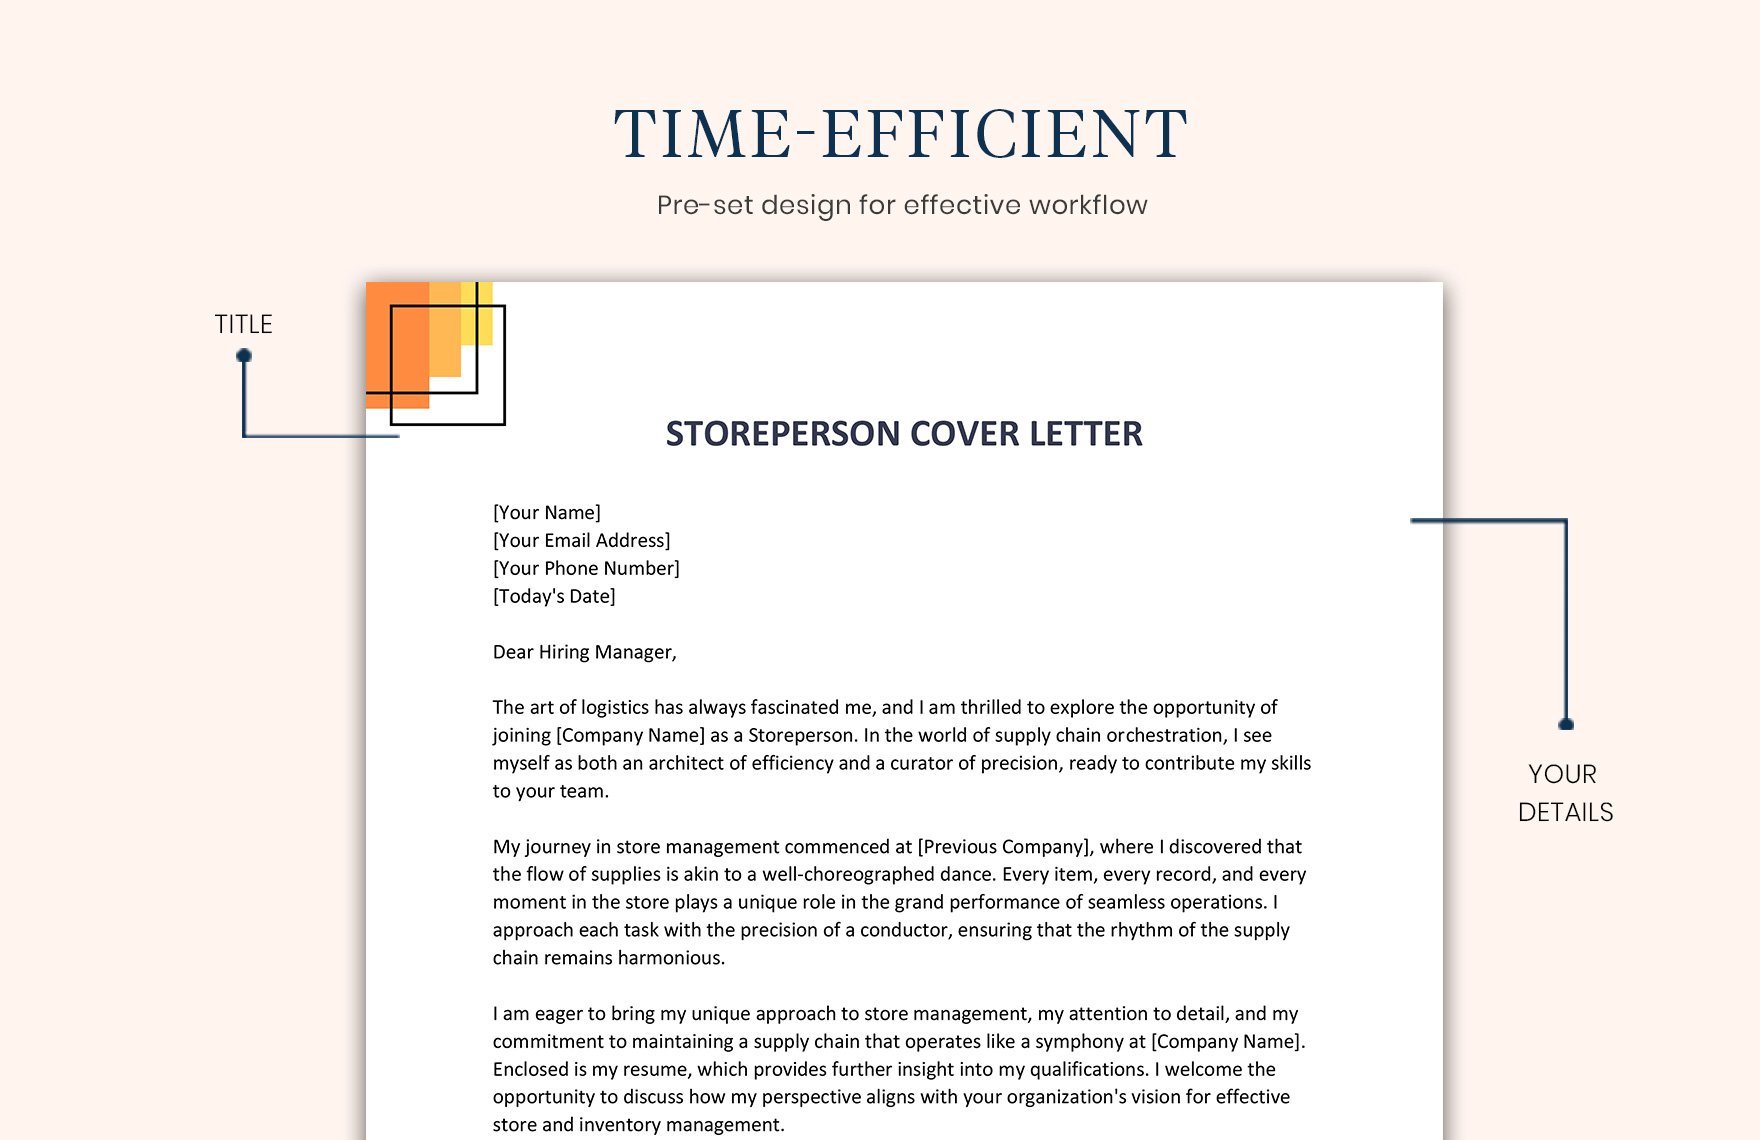 Storeperson Cover Letter